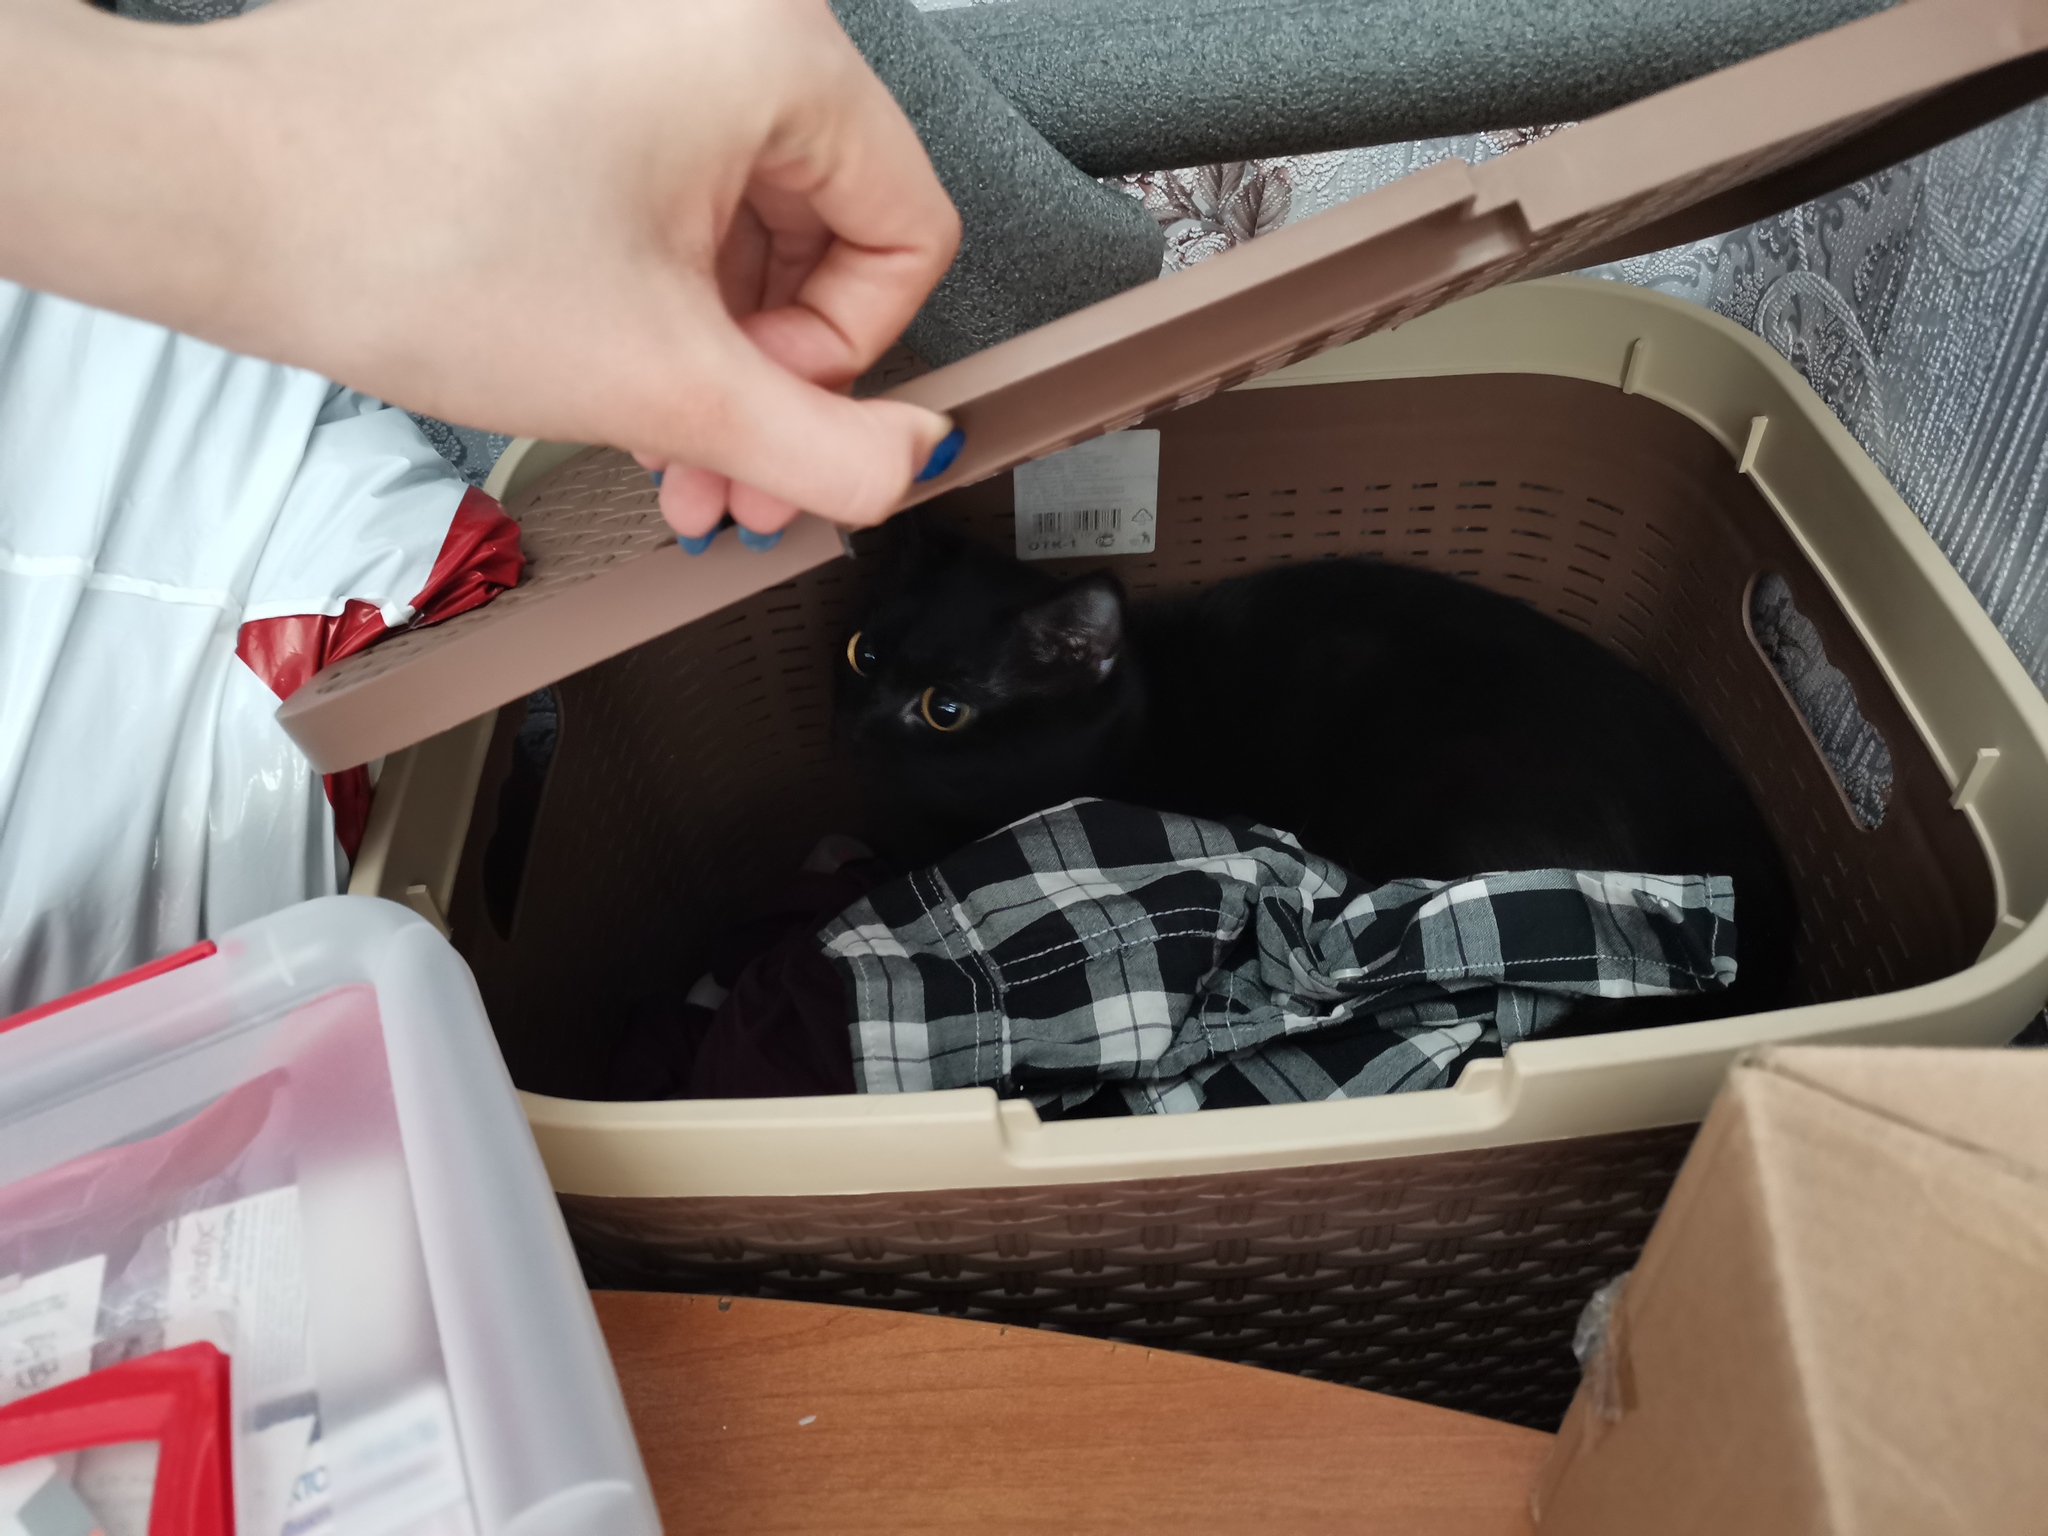 I didn't expect them to find it) - My, Hide and seek, Black cat, cat, Munchkin